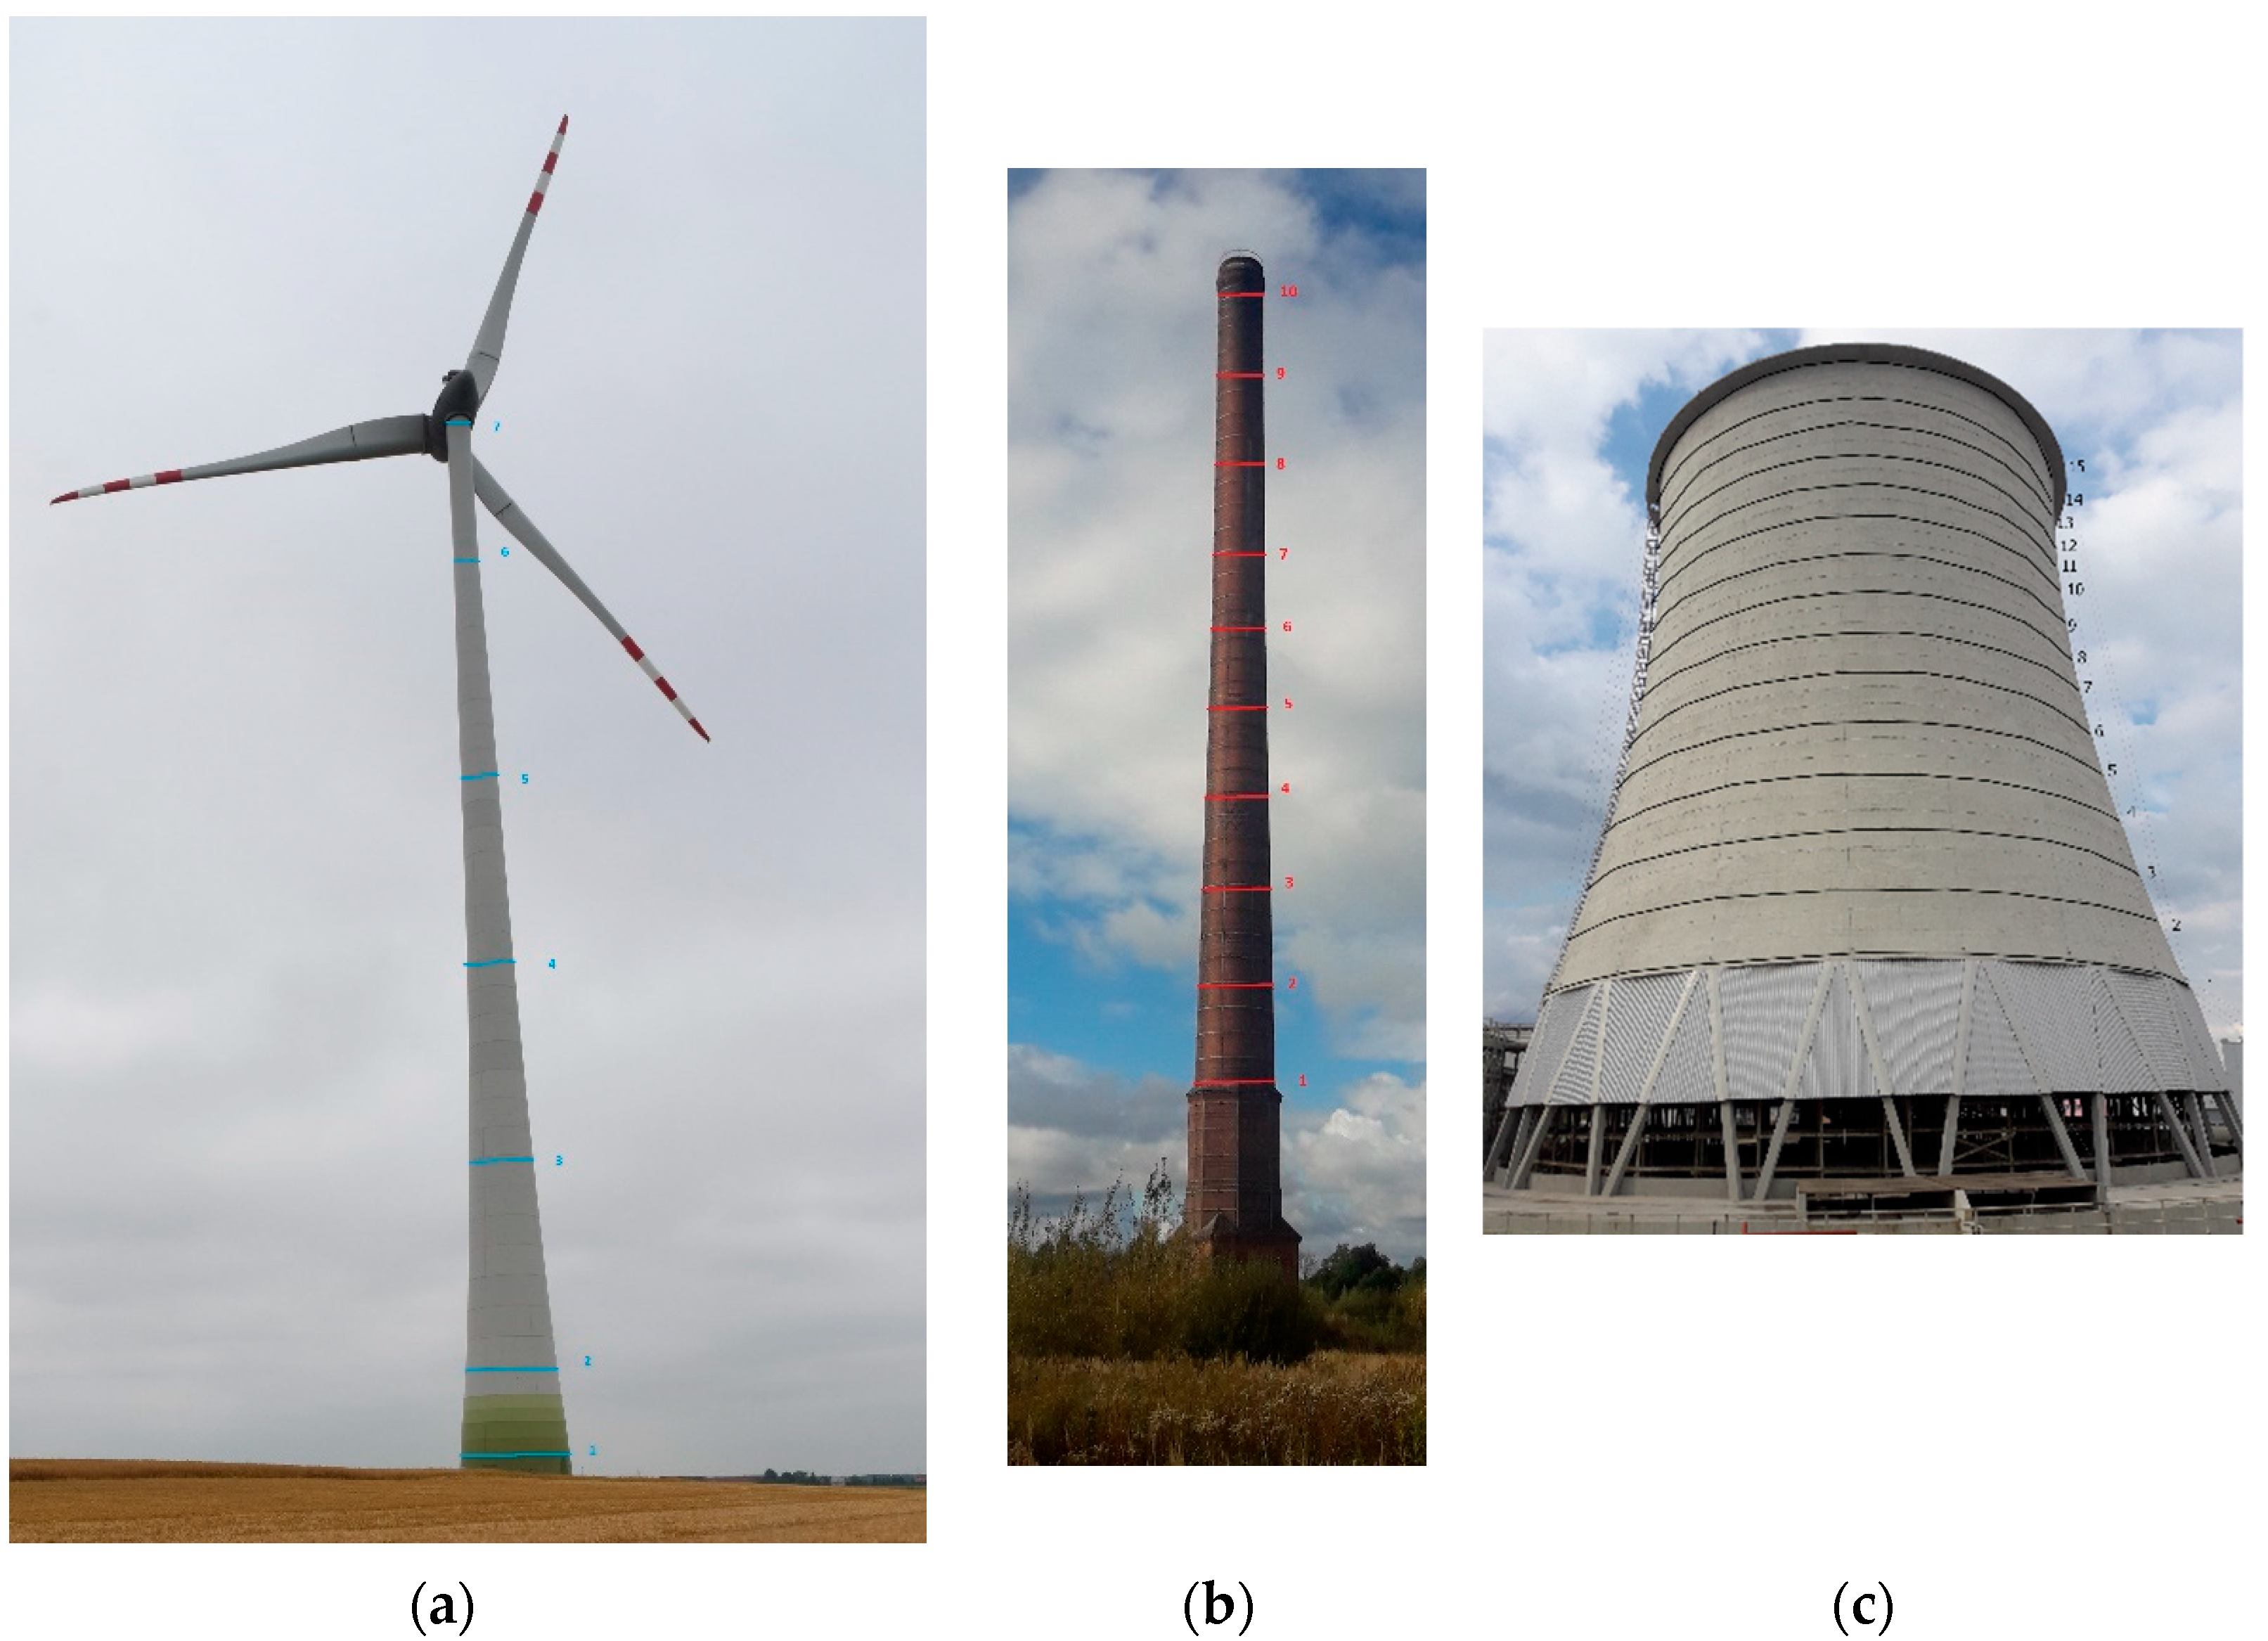 Energies | Free Full-Text | Monitoring the Geometry of Tall Objects in  Energy Industry